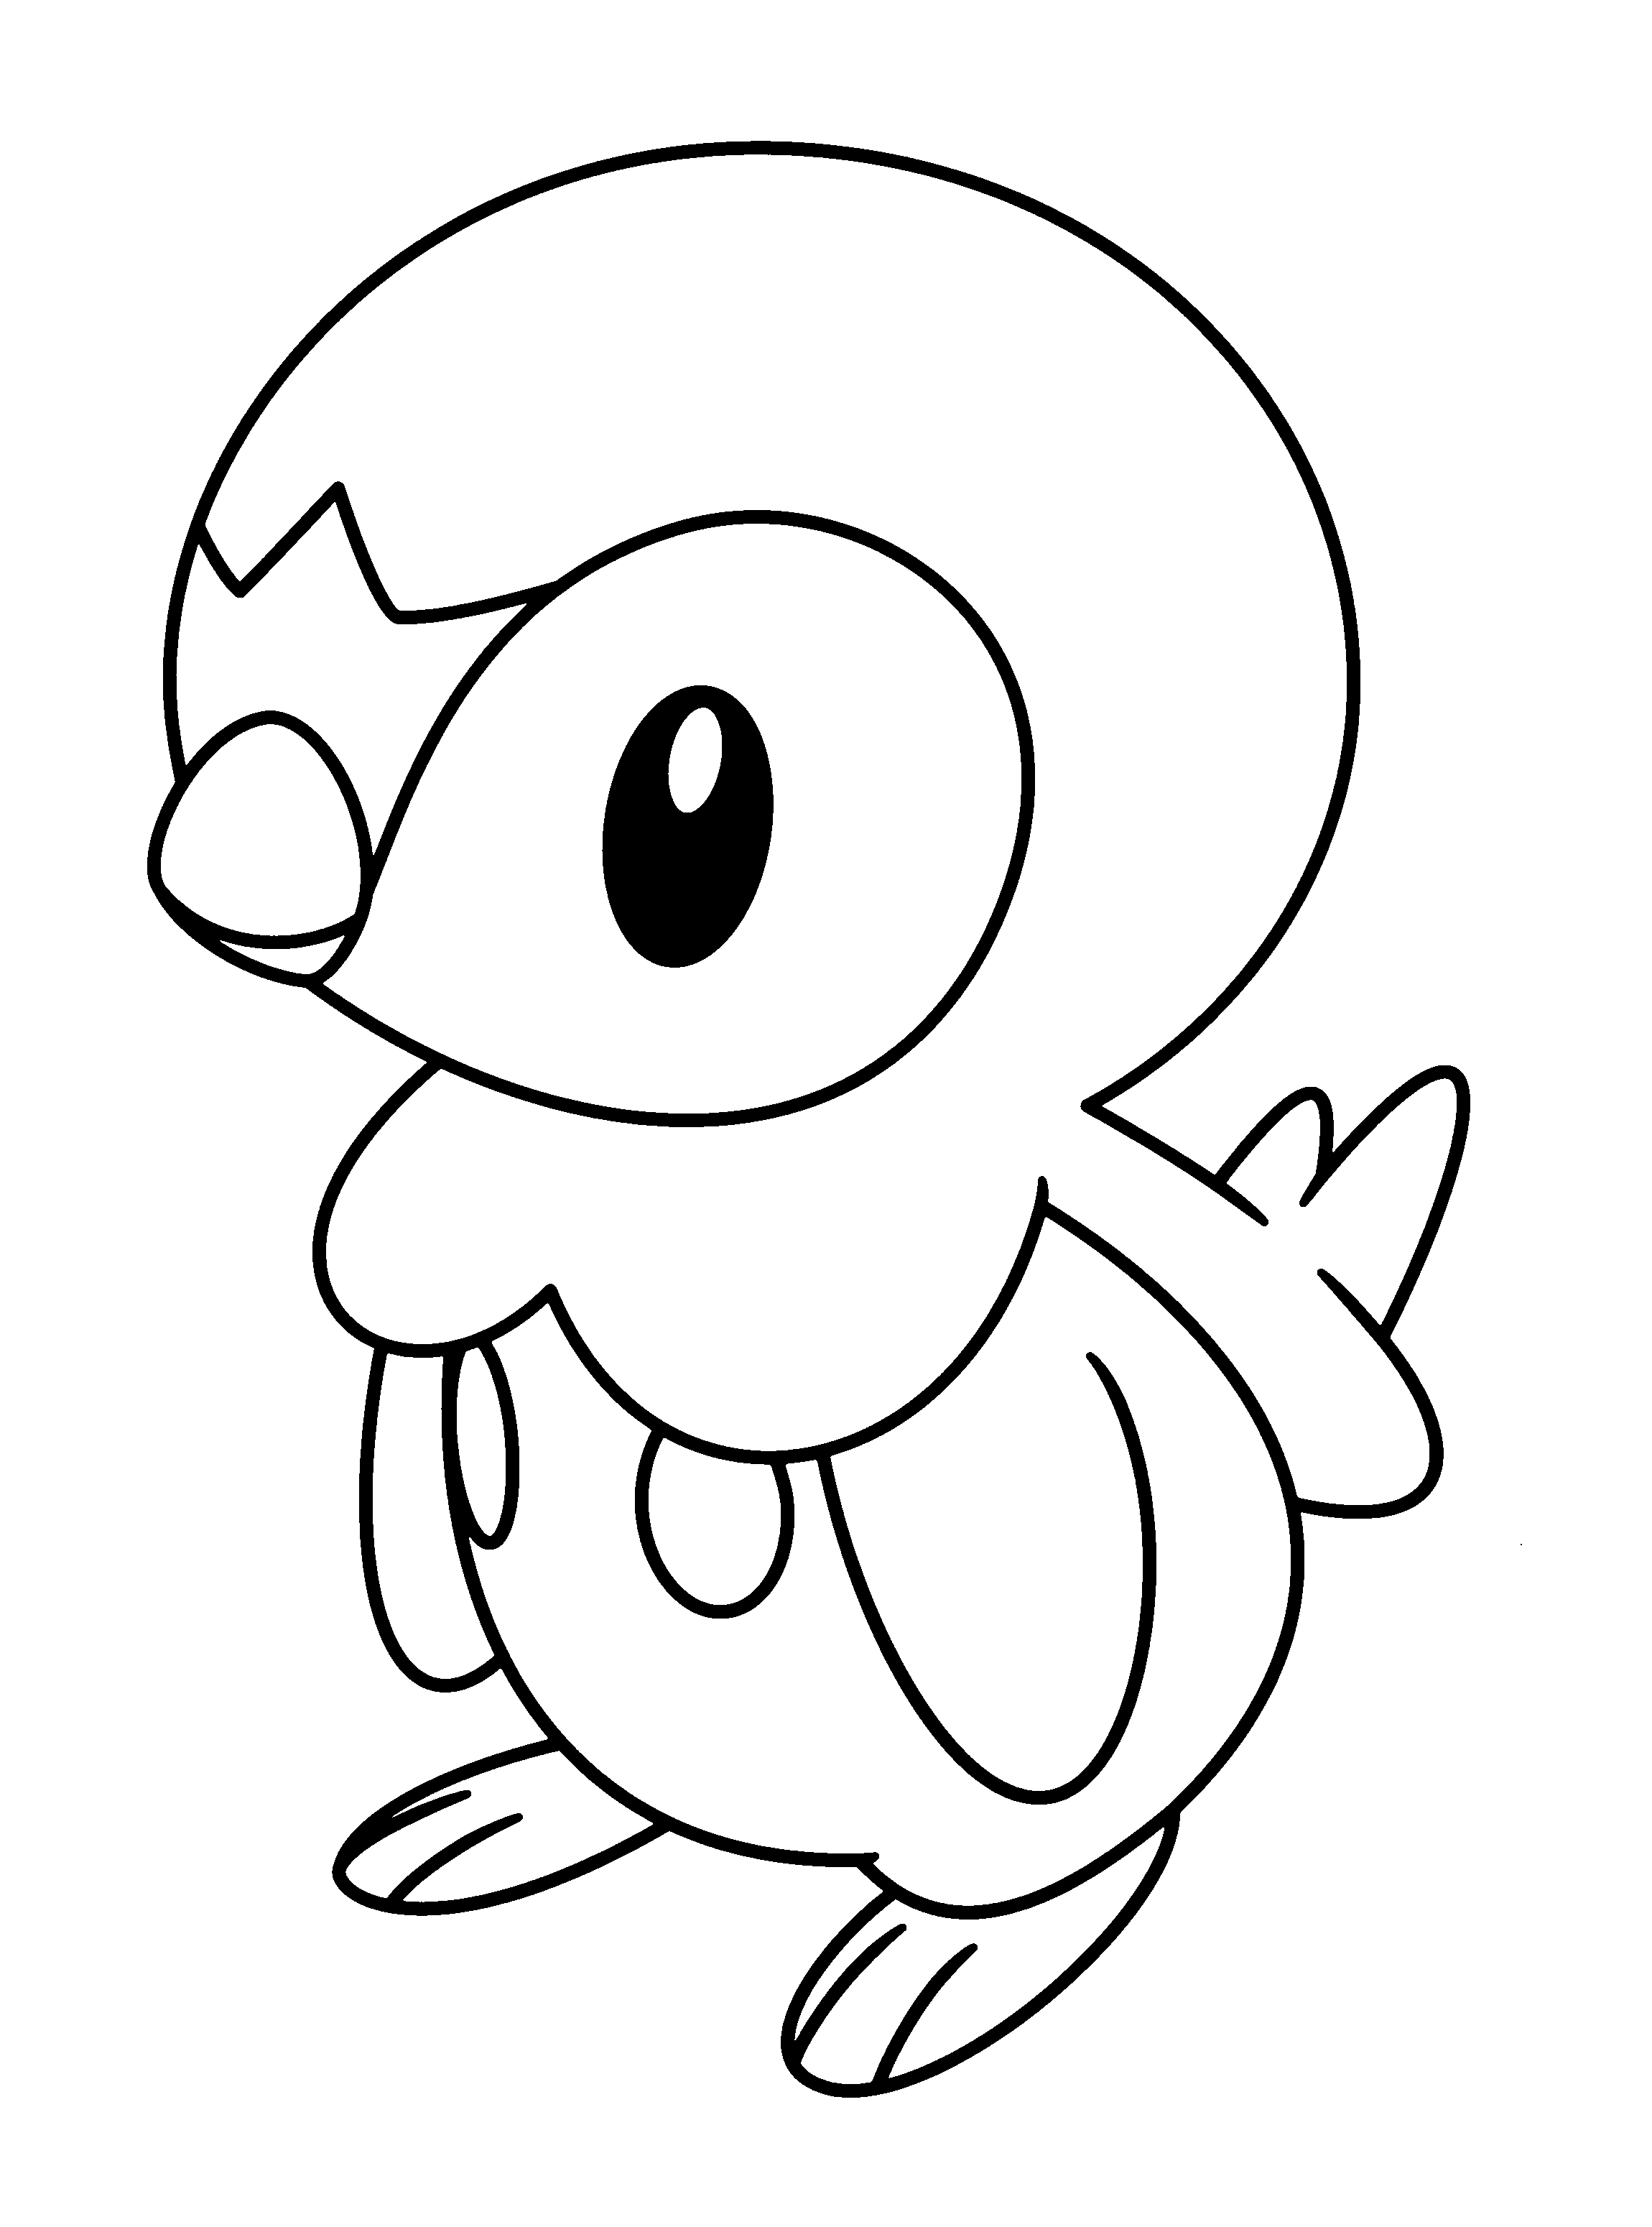 Pokemon Coloring Pages (13) Coloring Kids - Coloring Kids